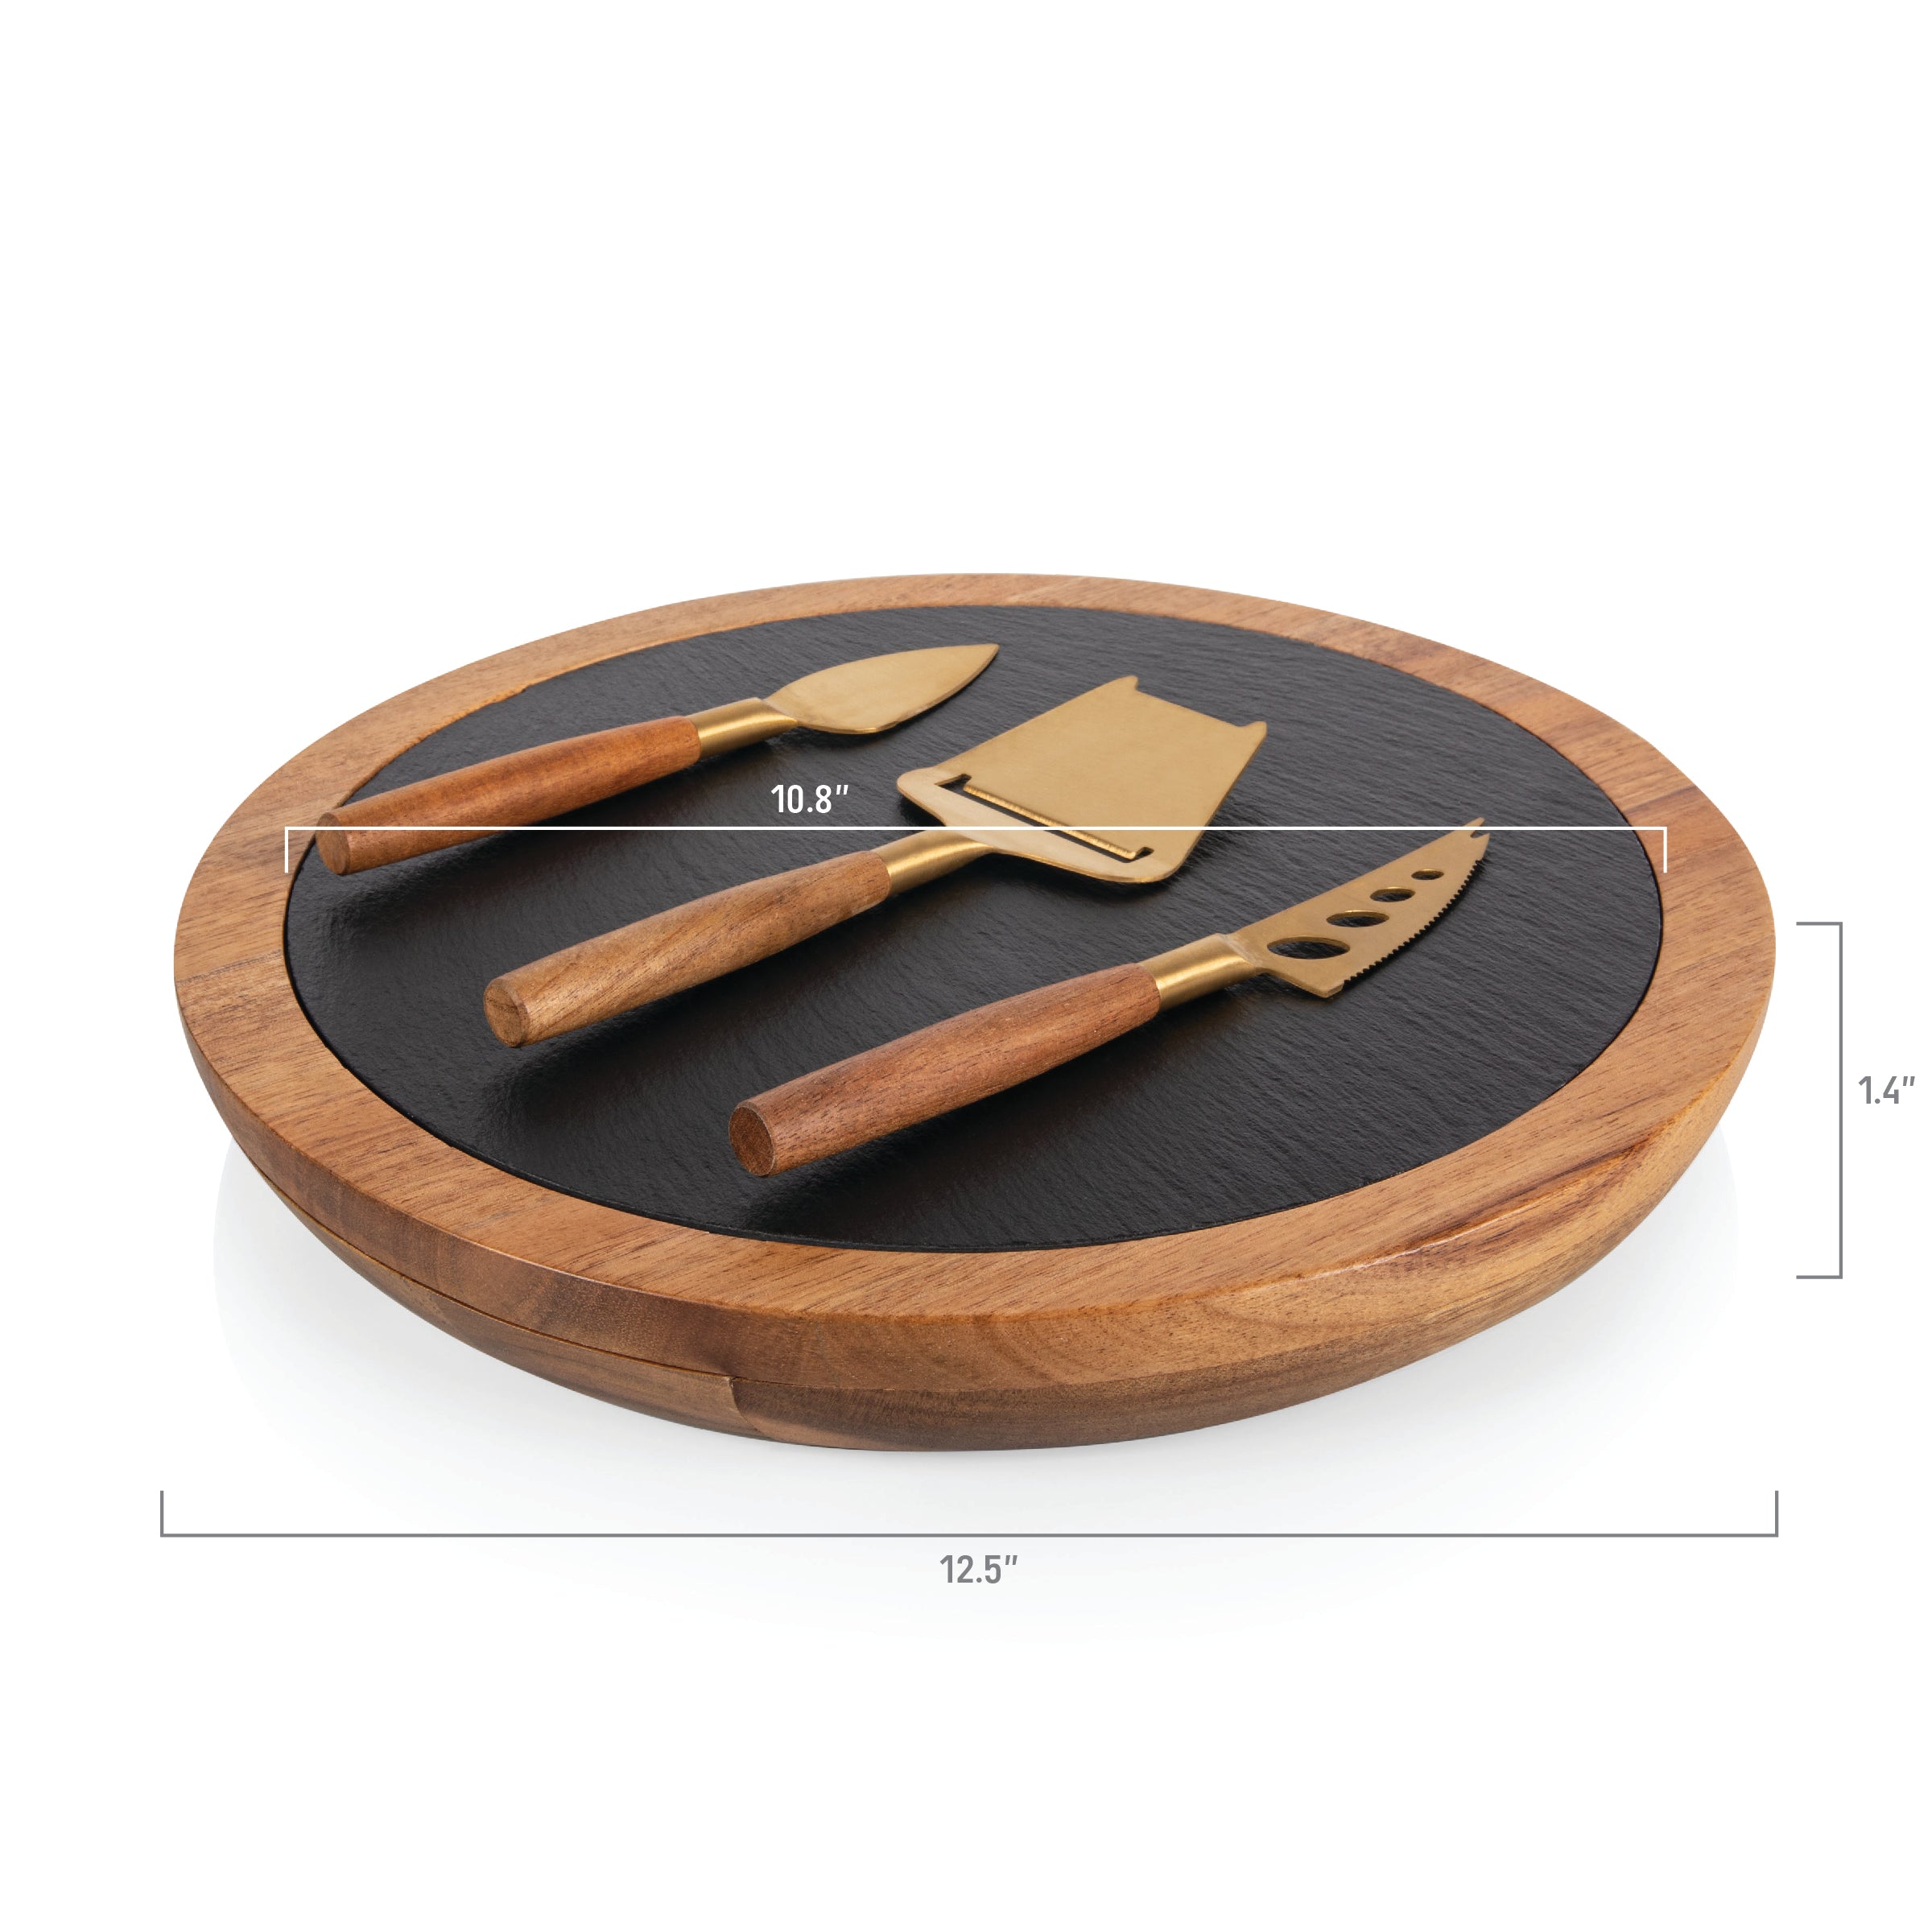 New York Jets - Insignia Acacia and Slate Serving Board with Cheese Tools